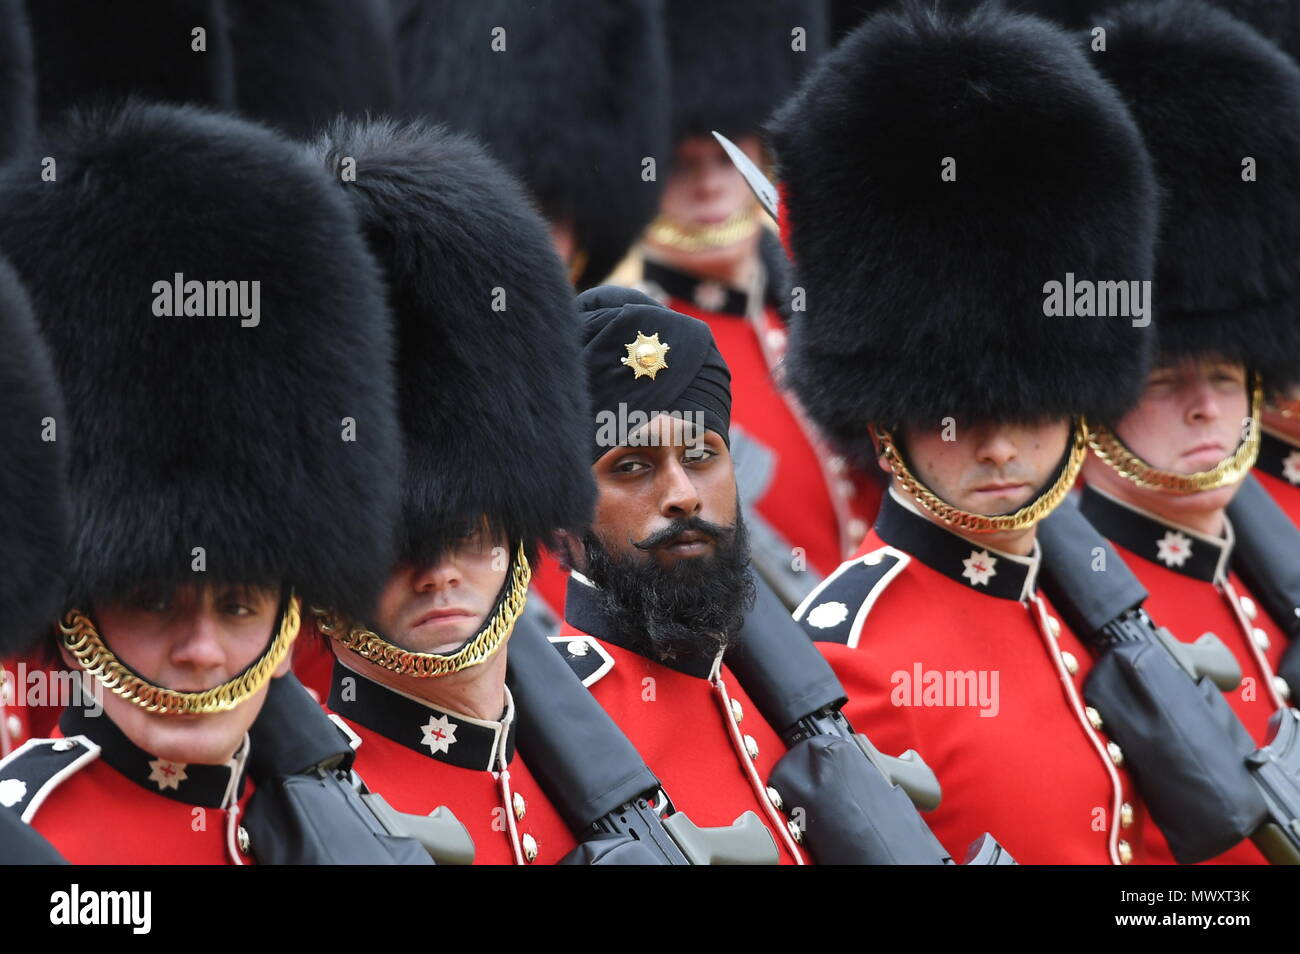 A Sikh member of the Coldstream Guards wearing a turban as he takes part in the Colonel's Review, the final rehearsal for Trooping the Colour, the Queen's annual birthday parade, in central London. Stock Photo